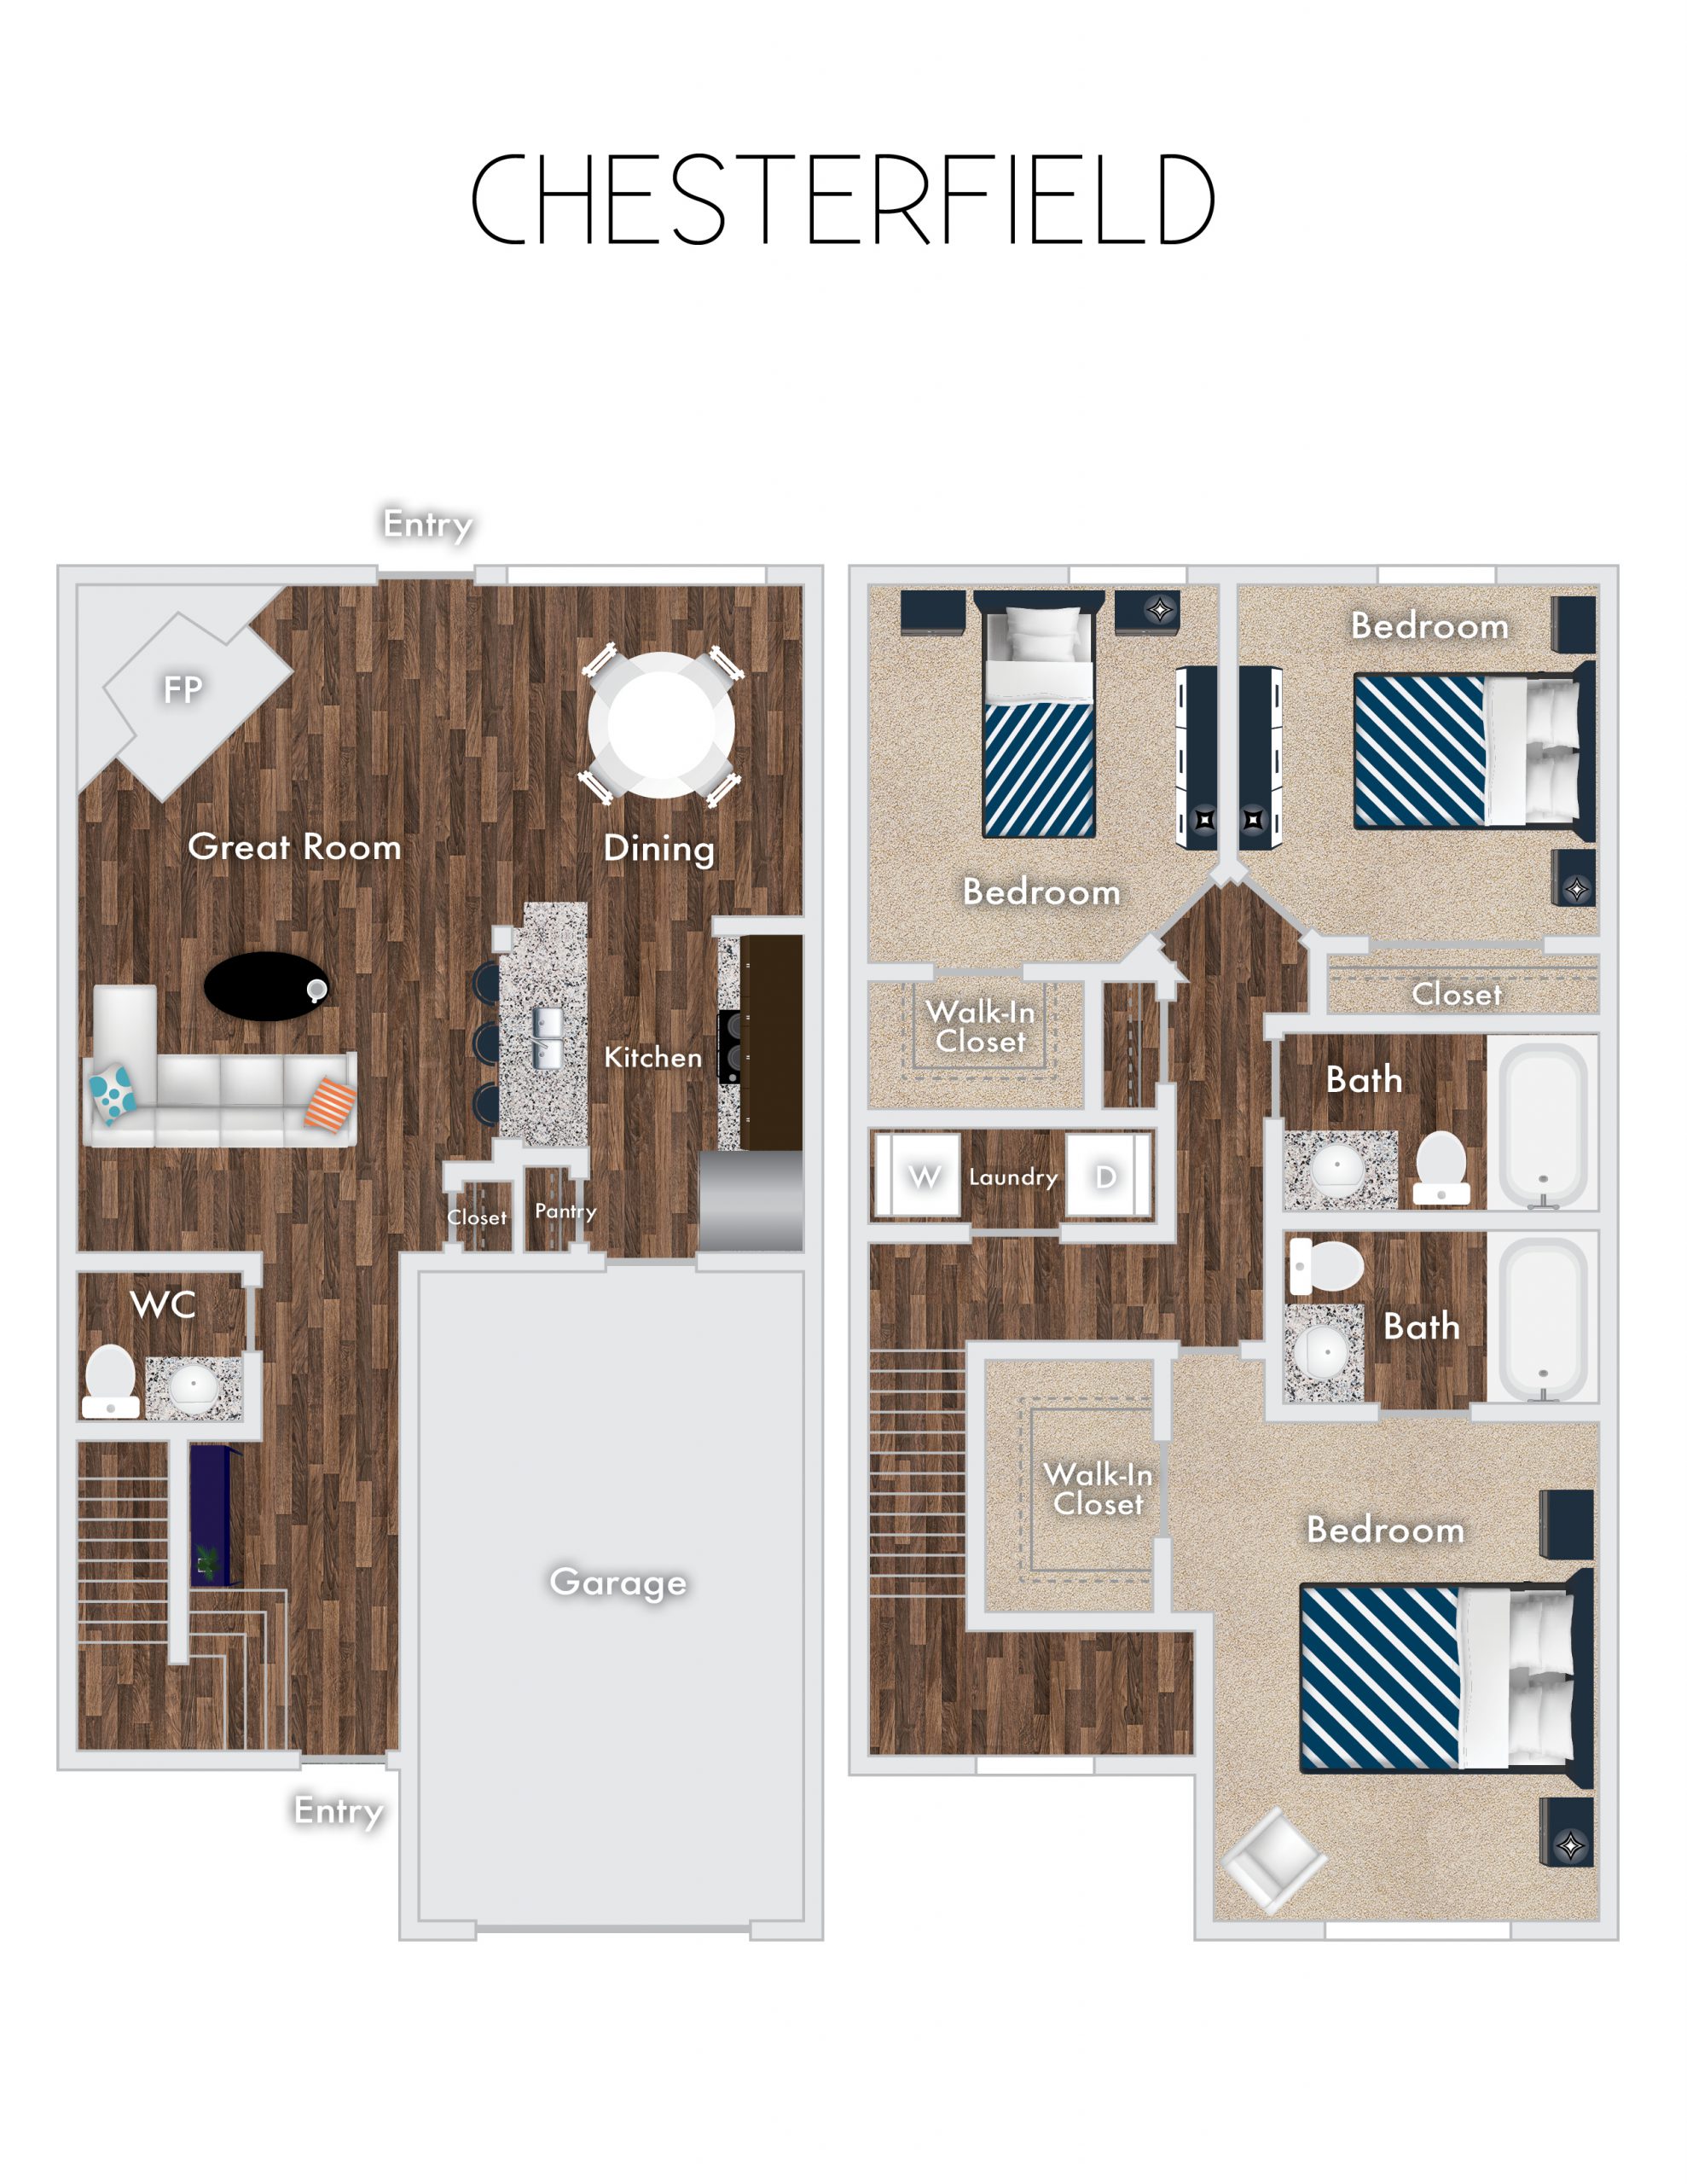 Chesterfield Floor Plan, 2 Story, 3 Bedrooms, 2 Baths with garage.